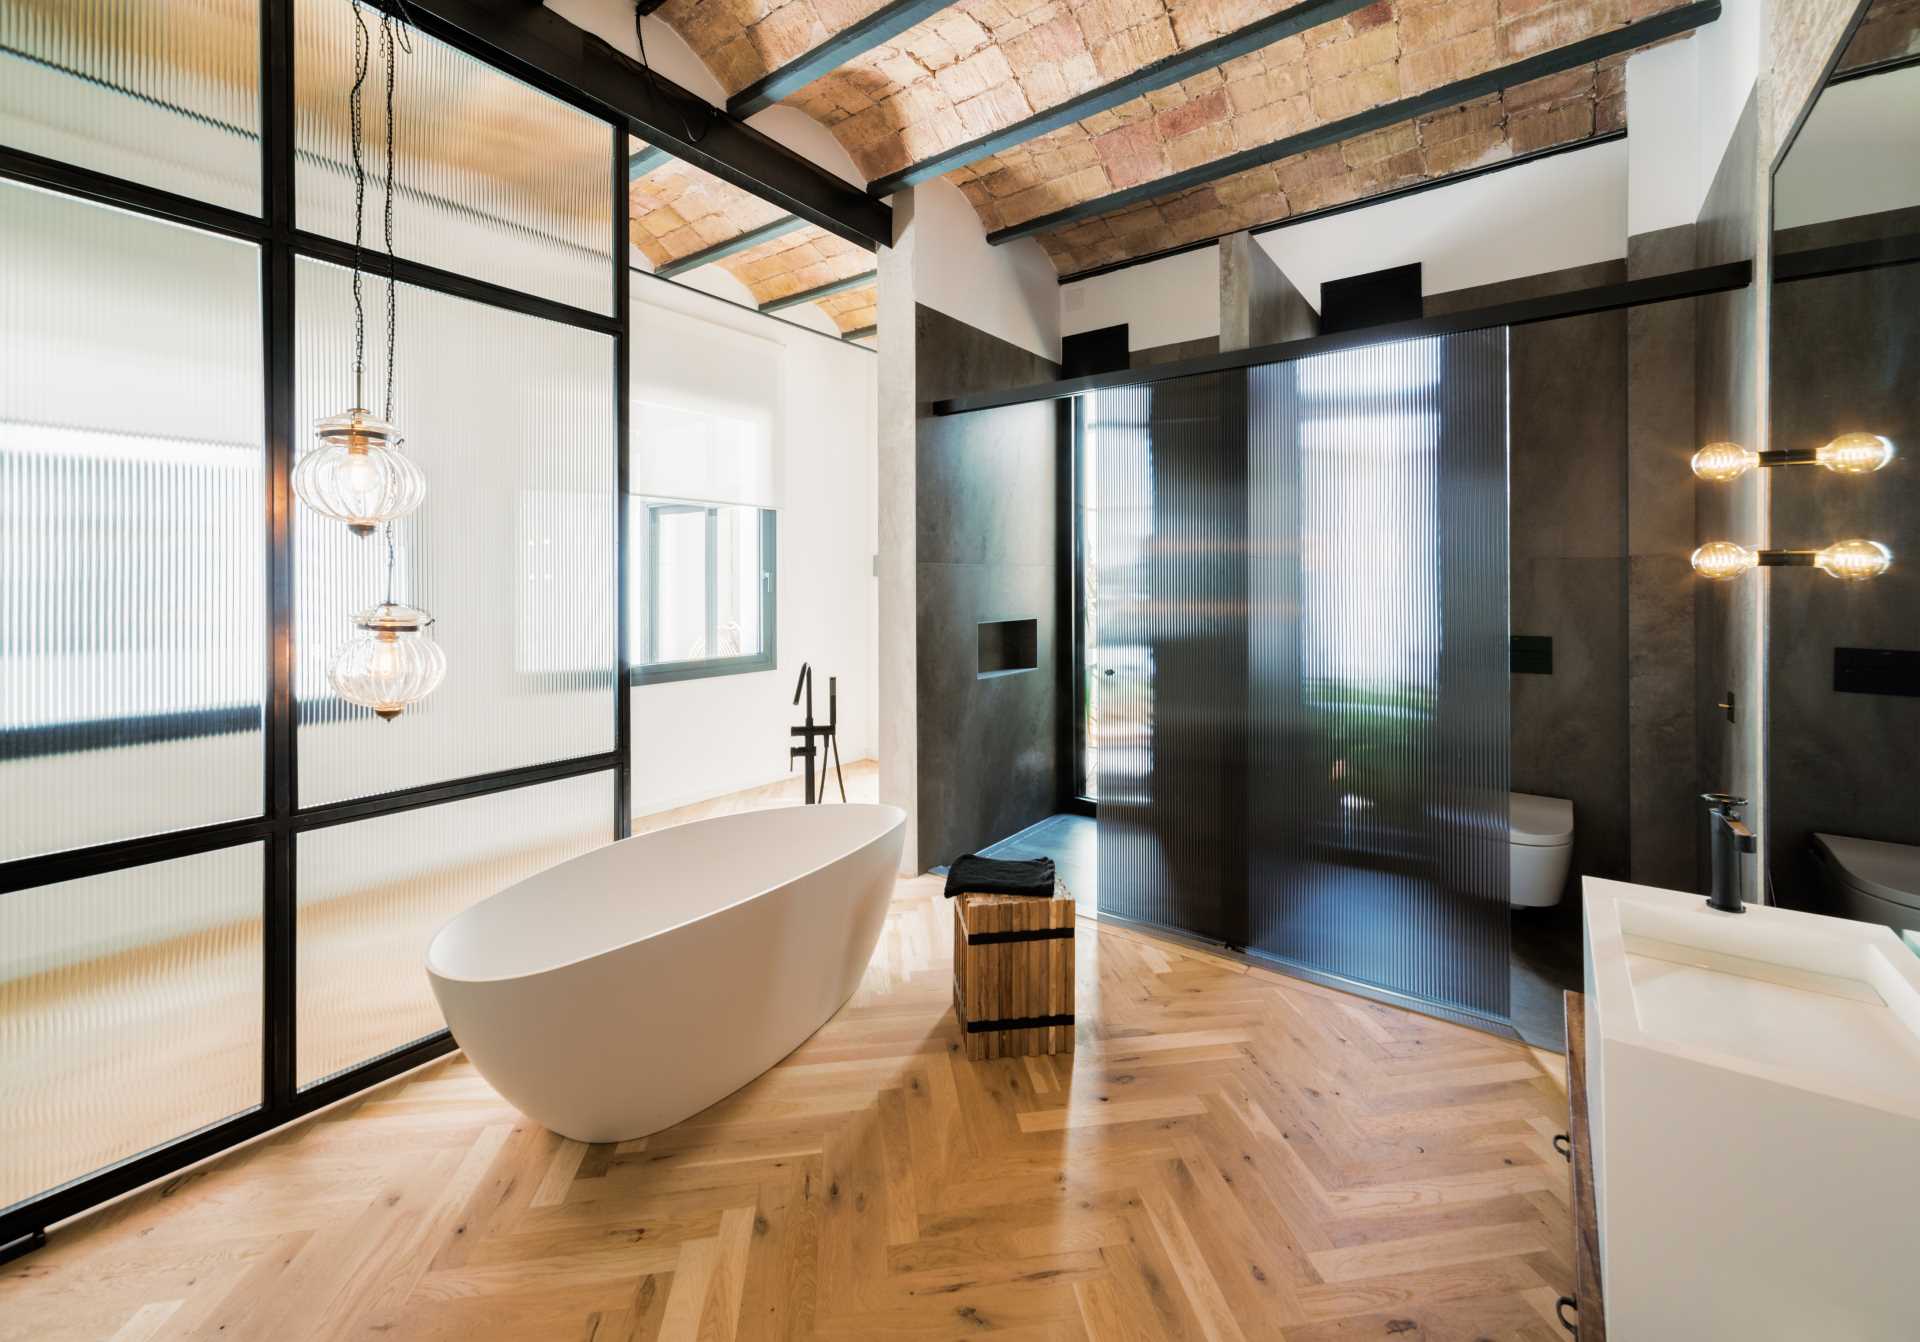 In this primary bedroom, herringbone flooring spans both the sleeping area and the bathroom, with a freestanding bathtub positioned in front of a large sliding glass door.